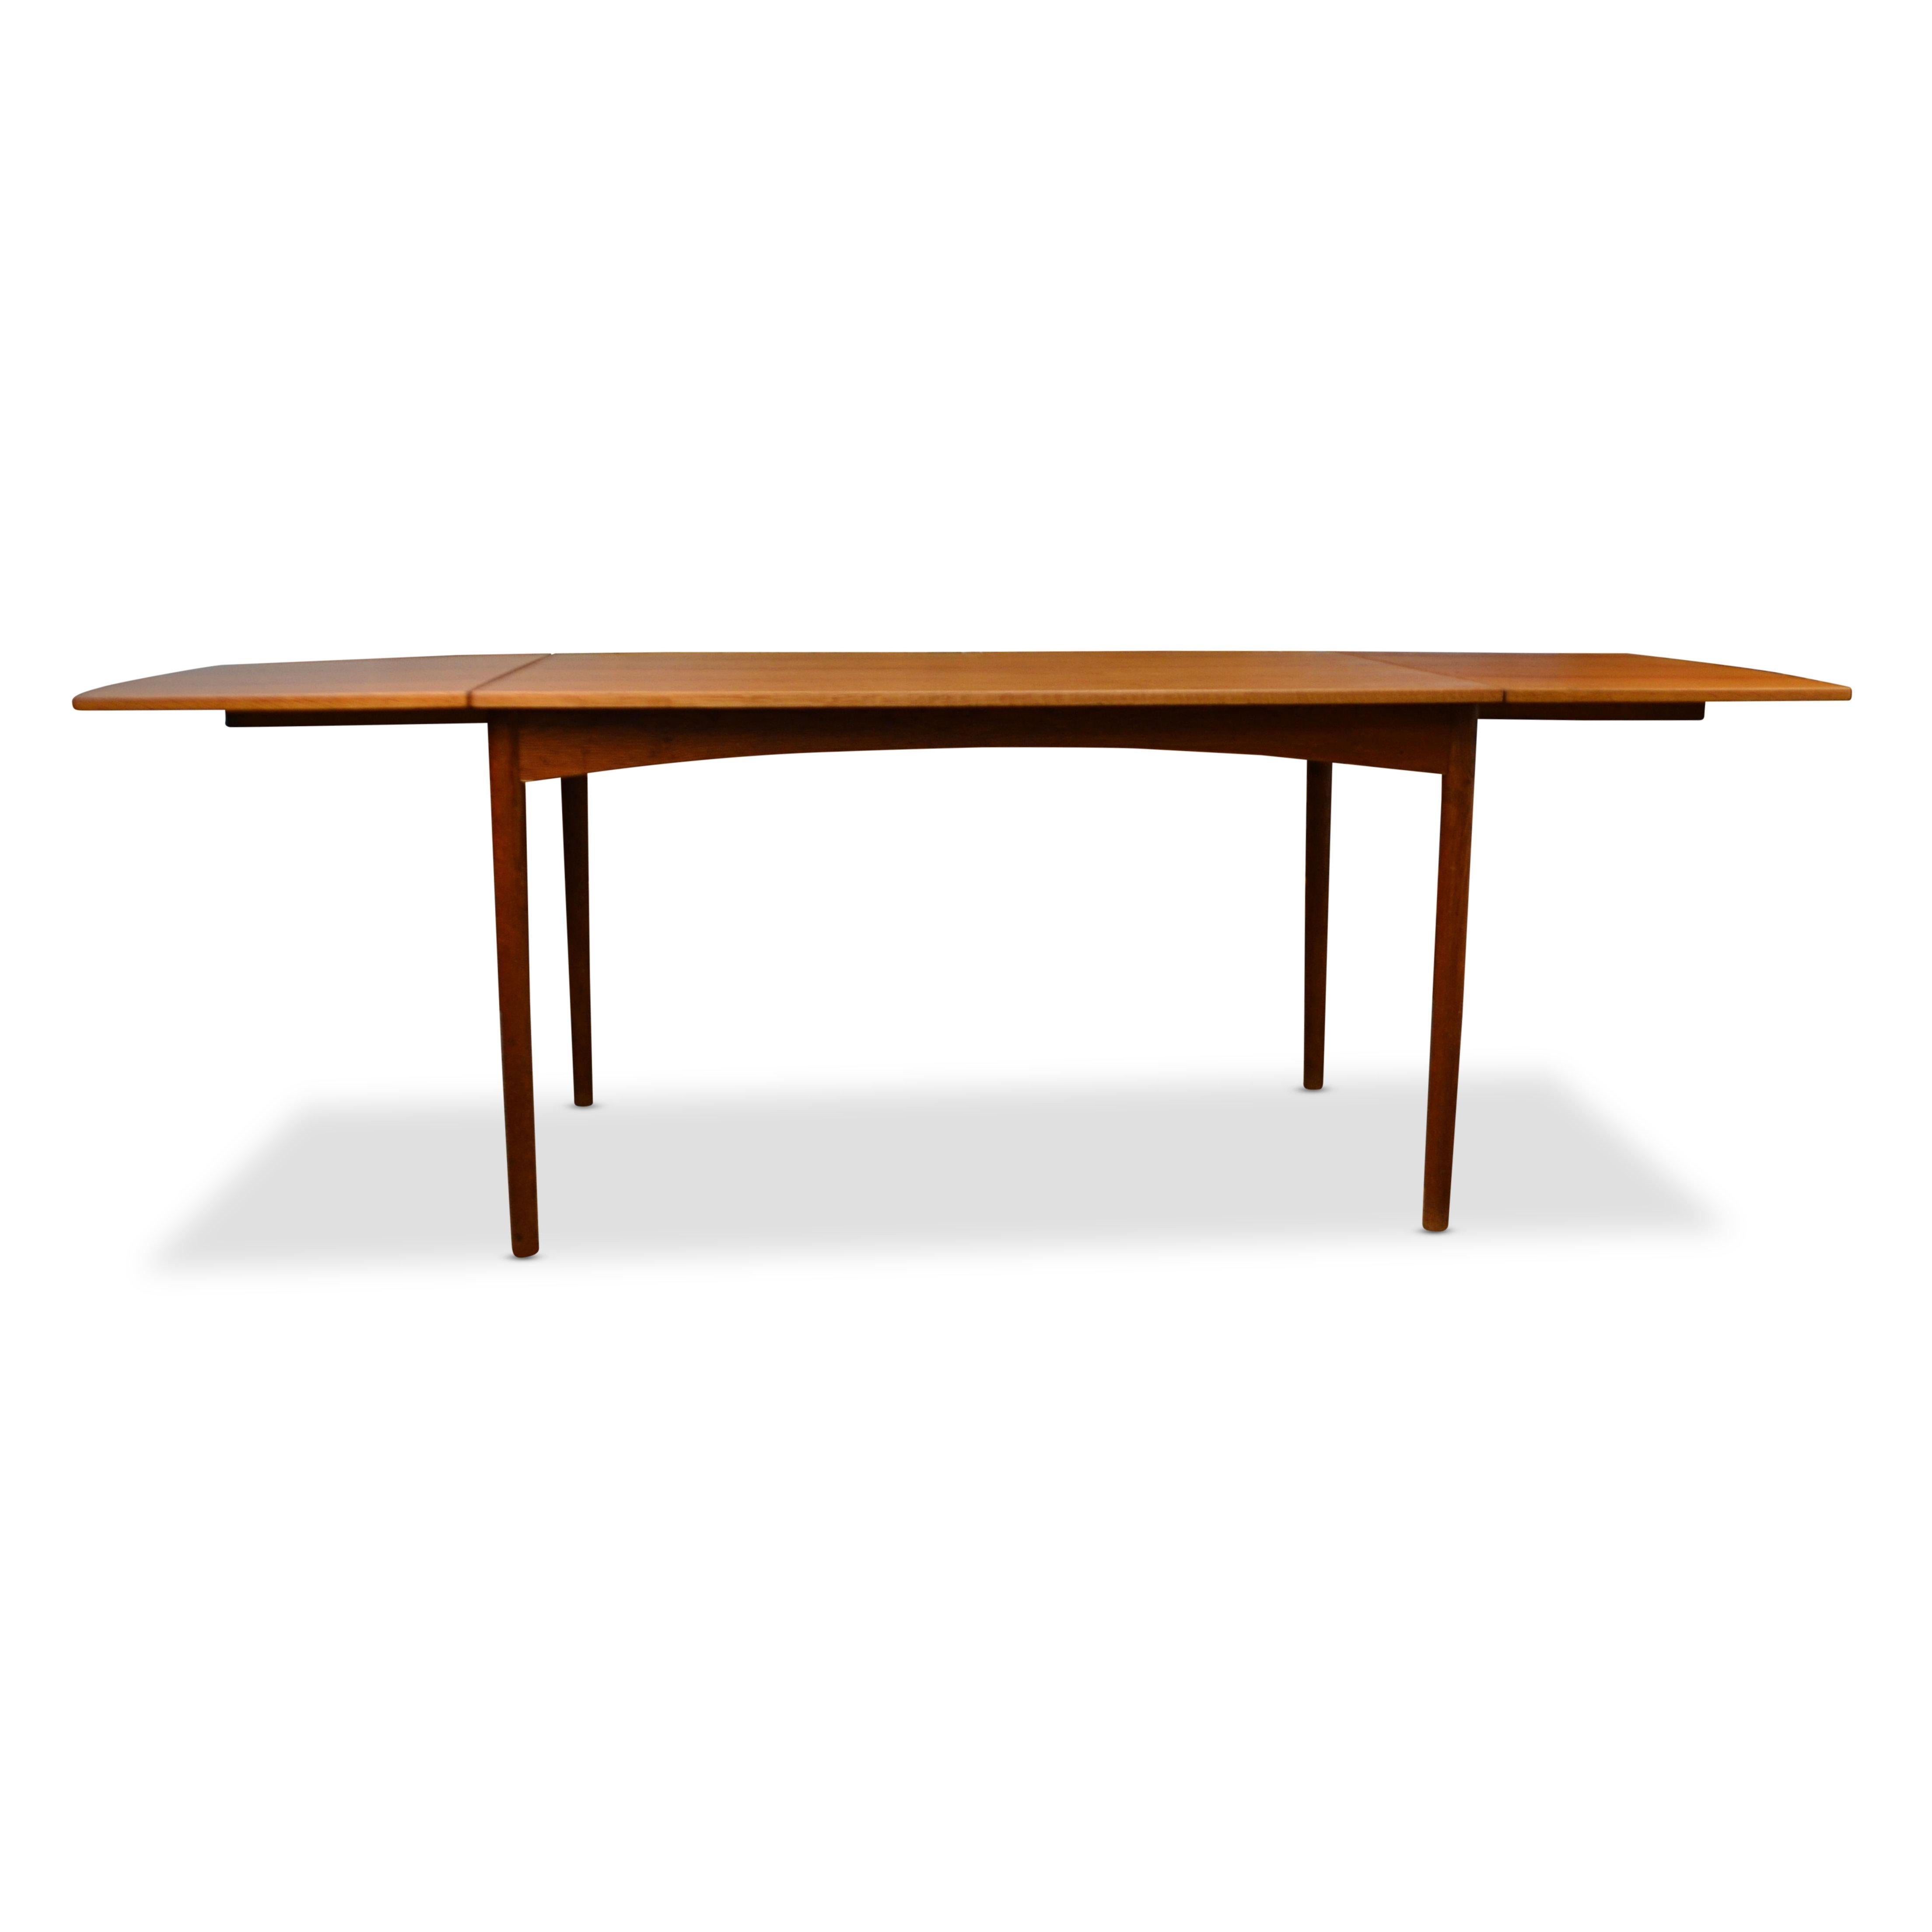 Mid-20th Century Danish Drop-Leaf Dining Table by Børge Mogensen